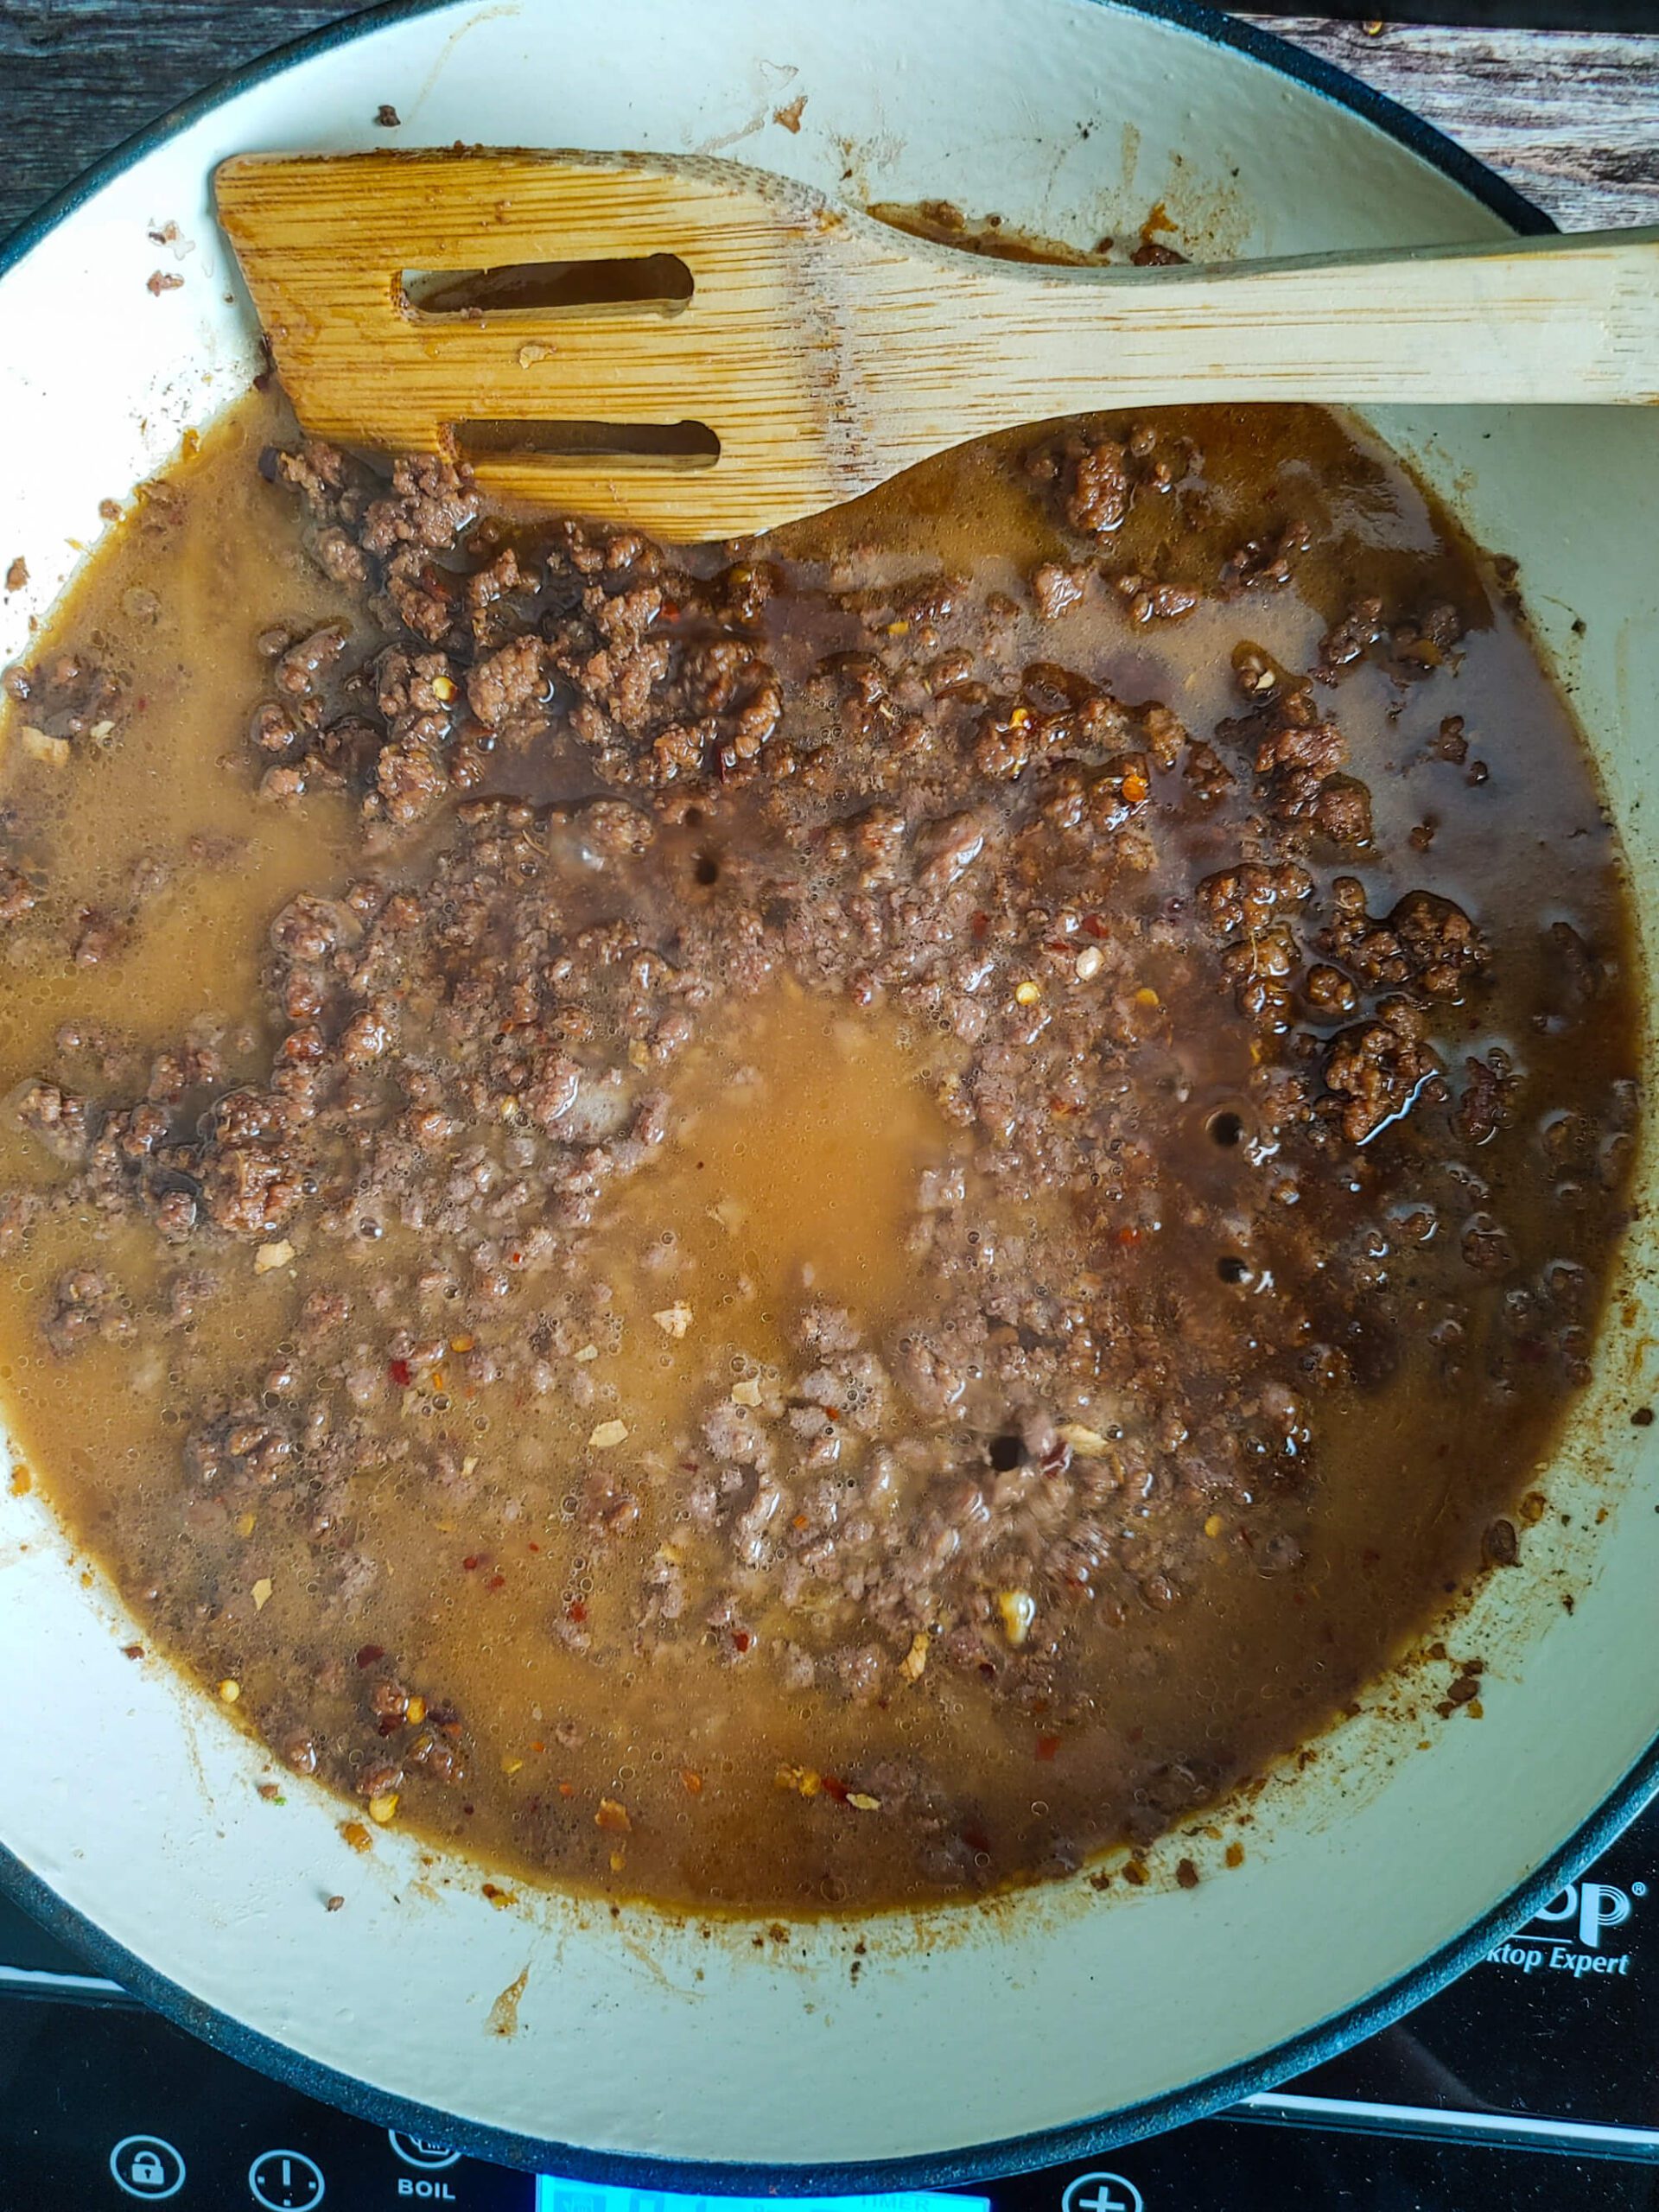 ADD THE SLURRY TO THE GROUND BEEF